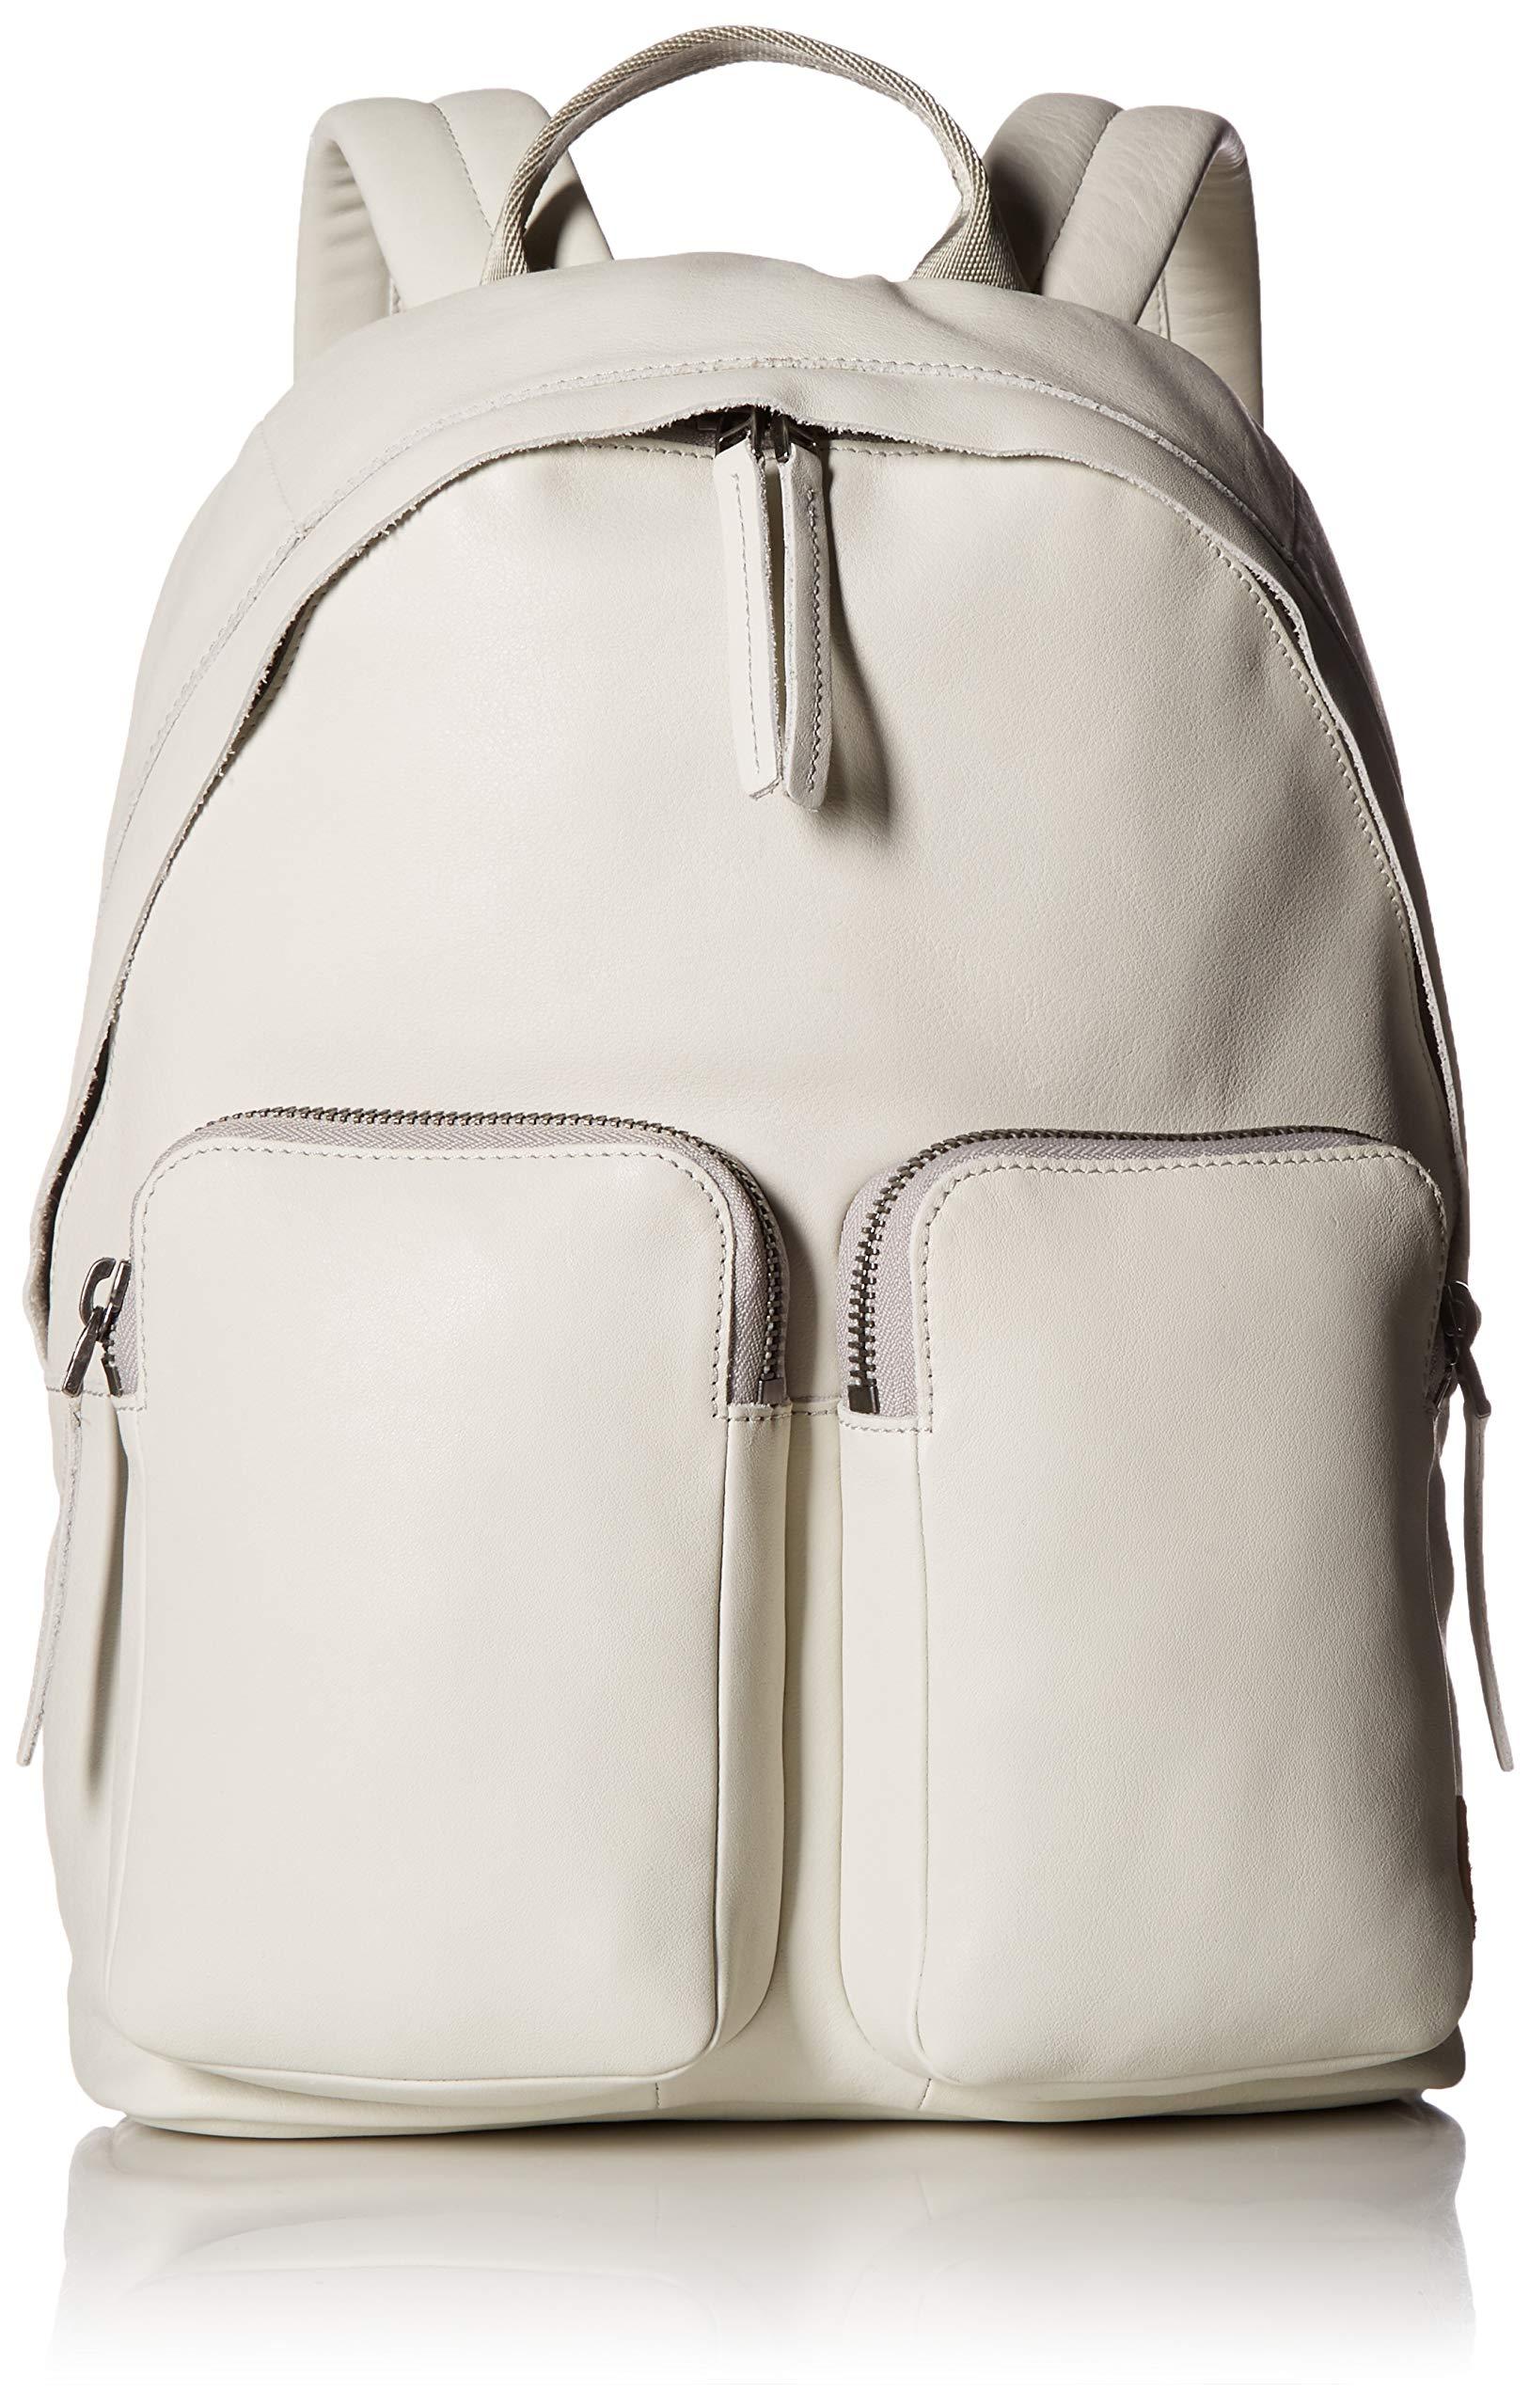 Ecco Backpack Flash Sales - www.puzzlewood.net 1695295639